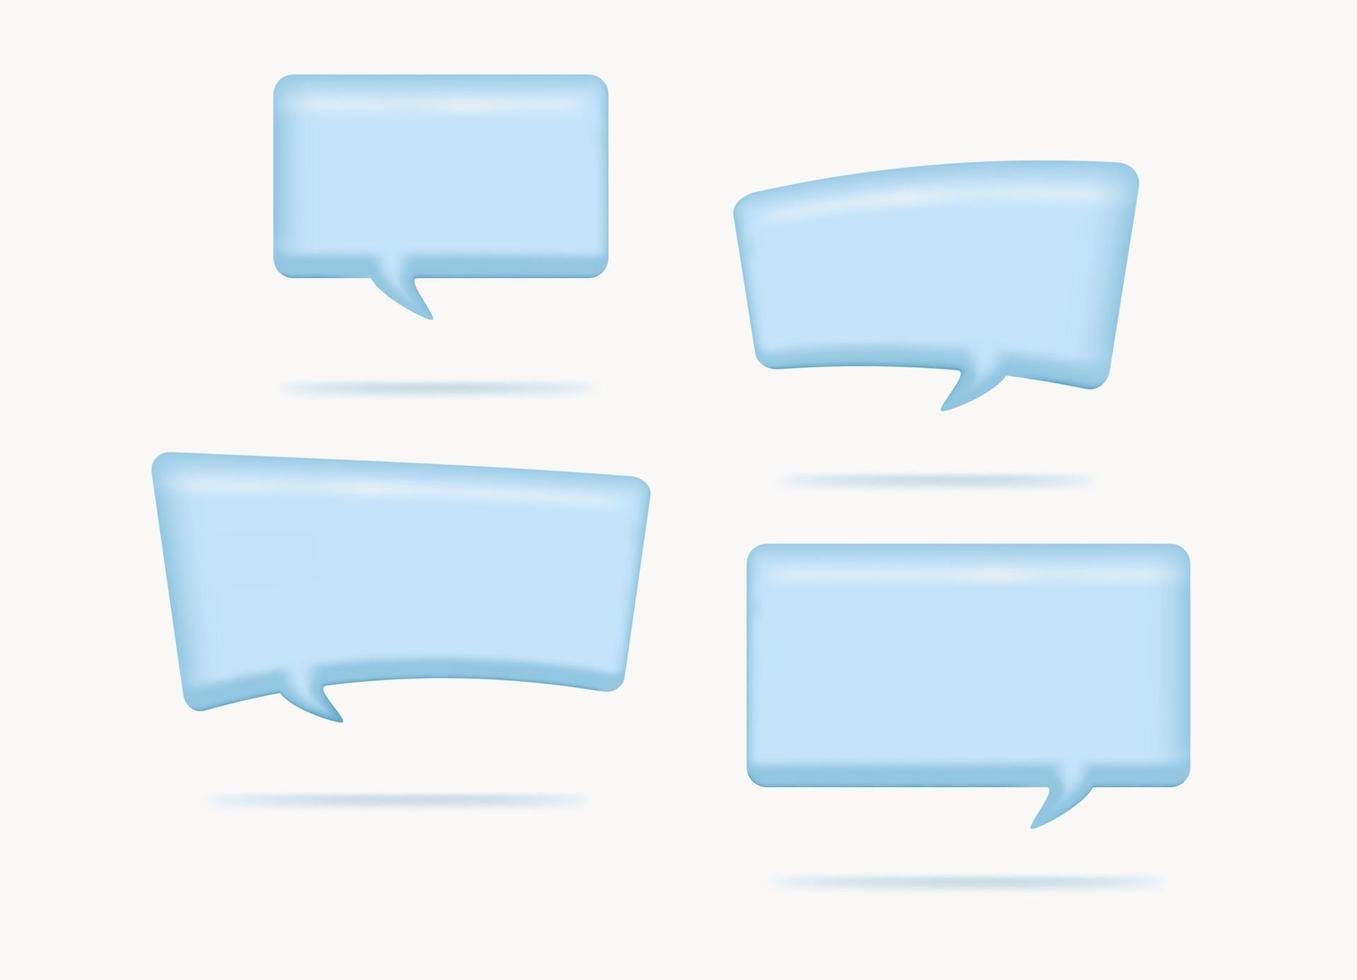 cute 3d blue bubble speak chat communication set icon illustration in square rounded shape vector